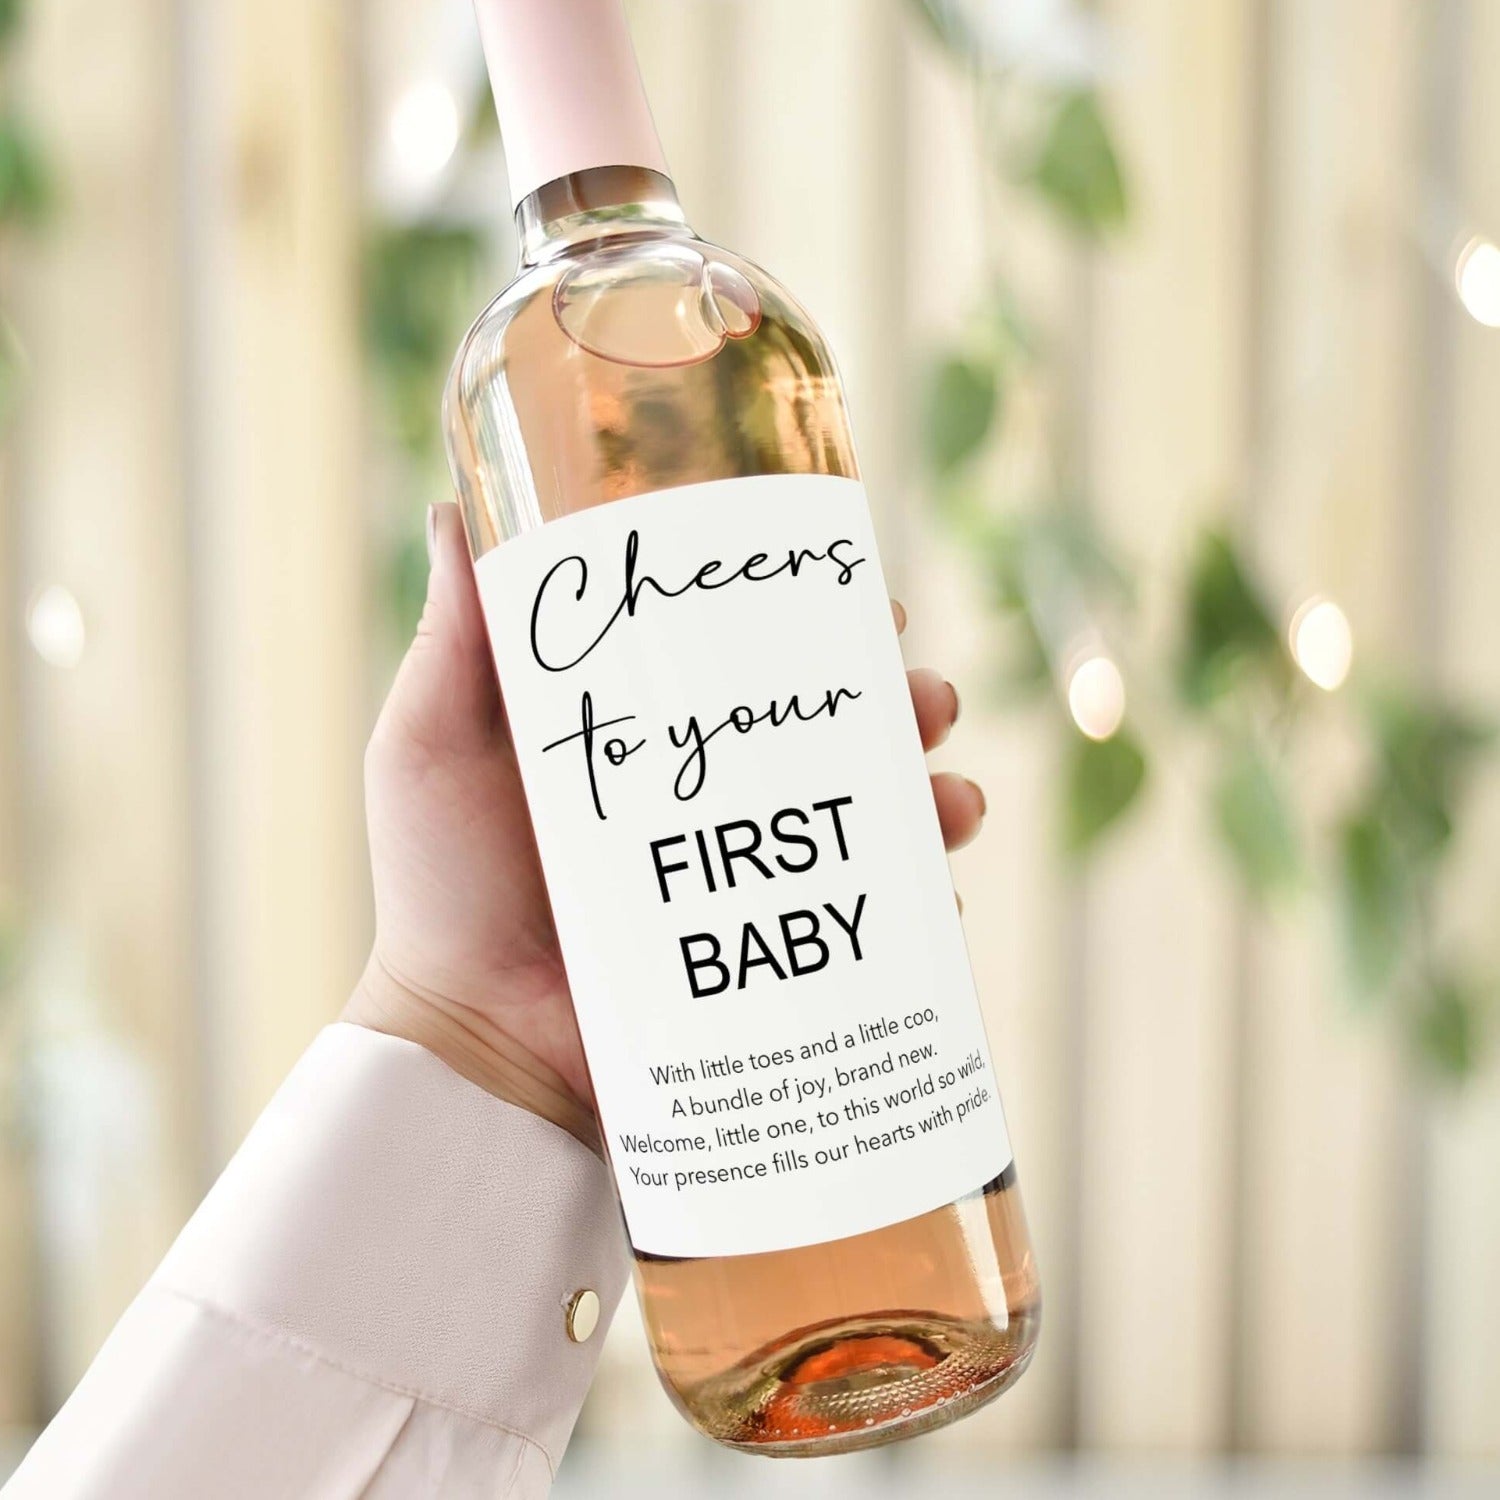 cheers to your new baby wine bottle label gift